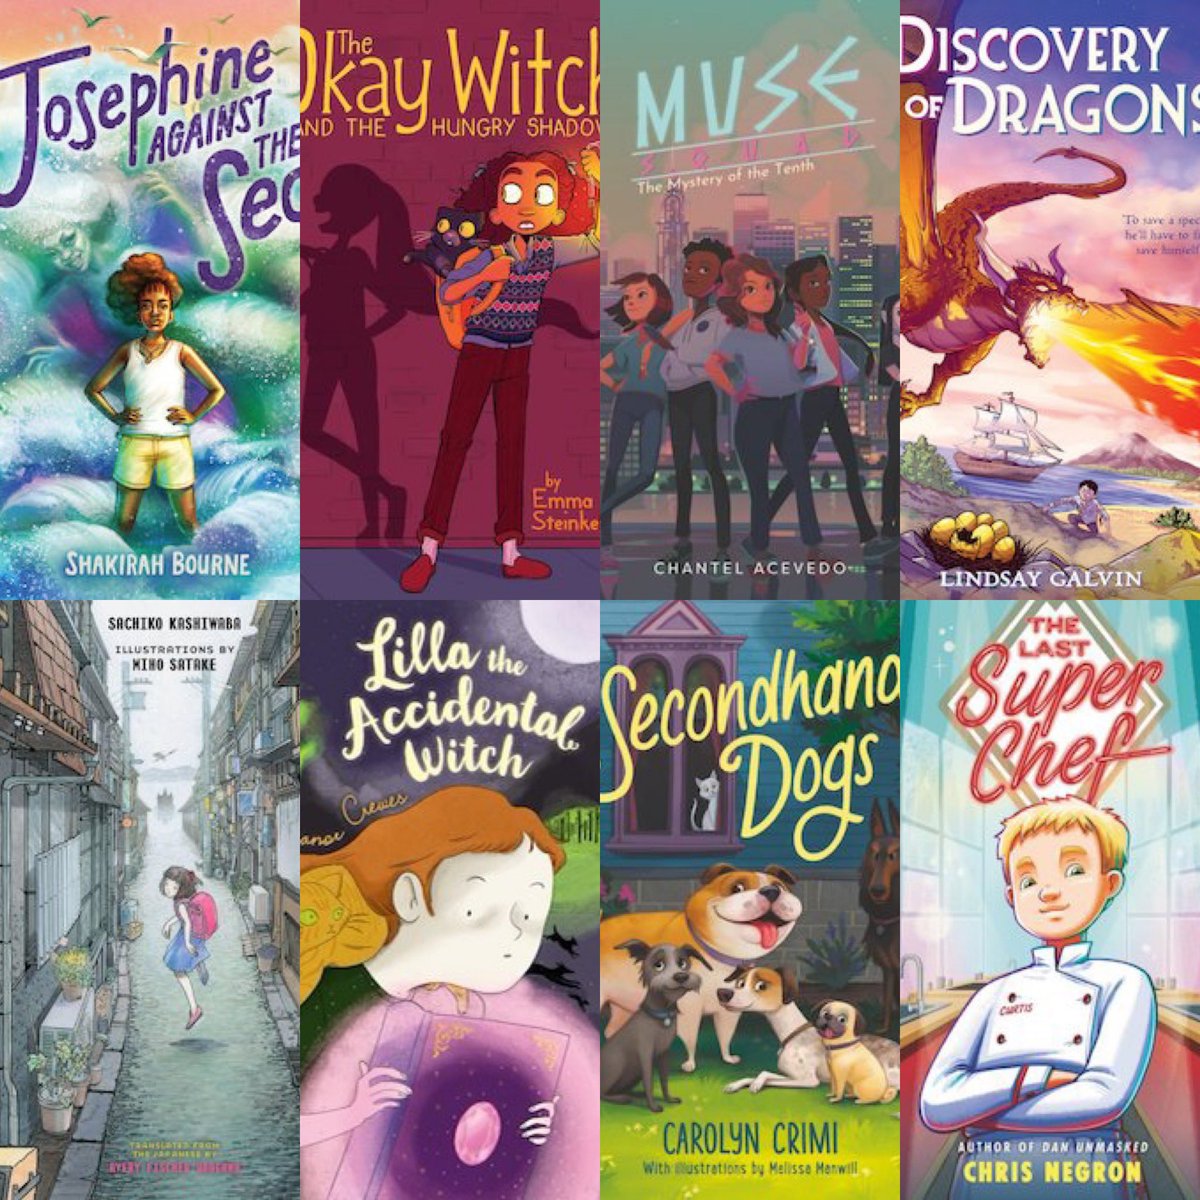 #bookbirthday for the #middlegrade #novels.  Josephine Against the Sea by @shakirahwrites. Okay Witch and the Hungry Shadow by @emsteinkellner. The Mystery of the Tenth by @chantelacevedo. A Discovery of Dragons by @LindsayGalvin. Temple Alley Summer by #sachikokashiwaba.